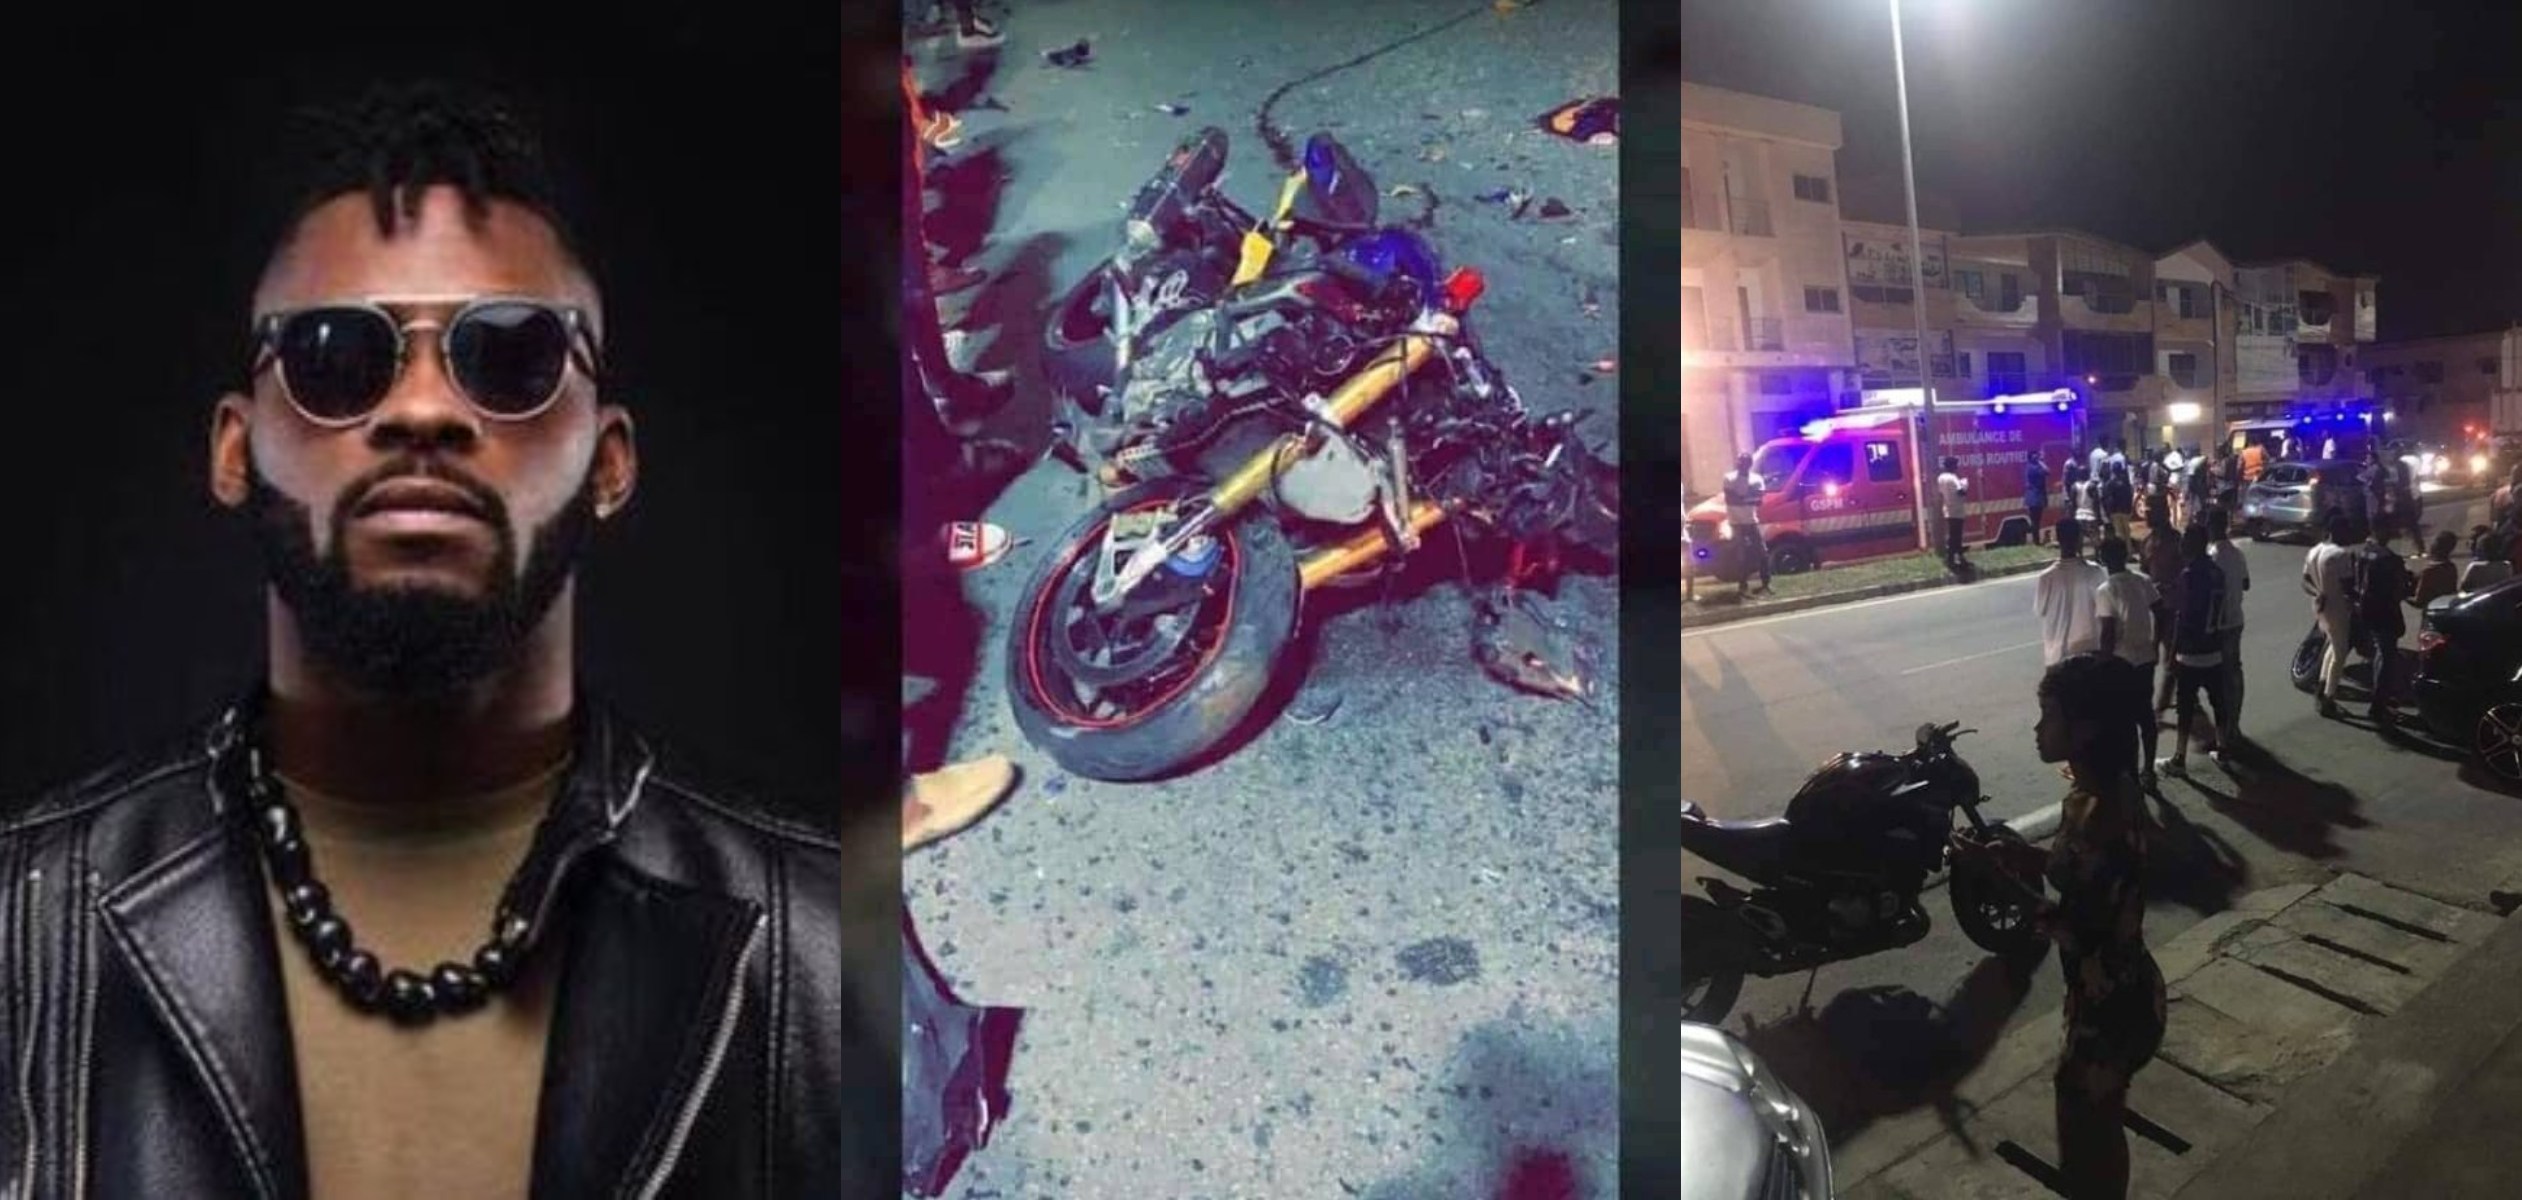 Watch: CCTV footage shows how DJ Arafat’s accident occurred